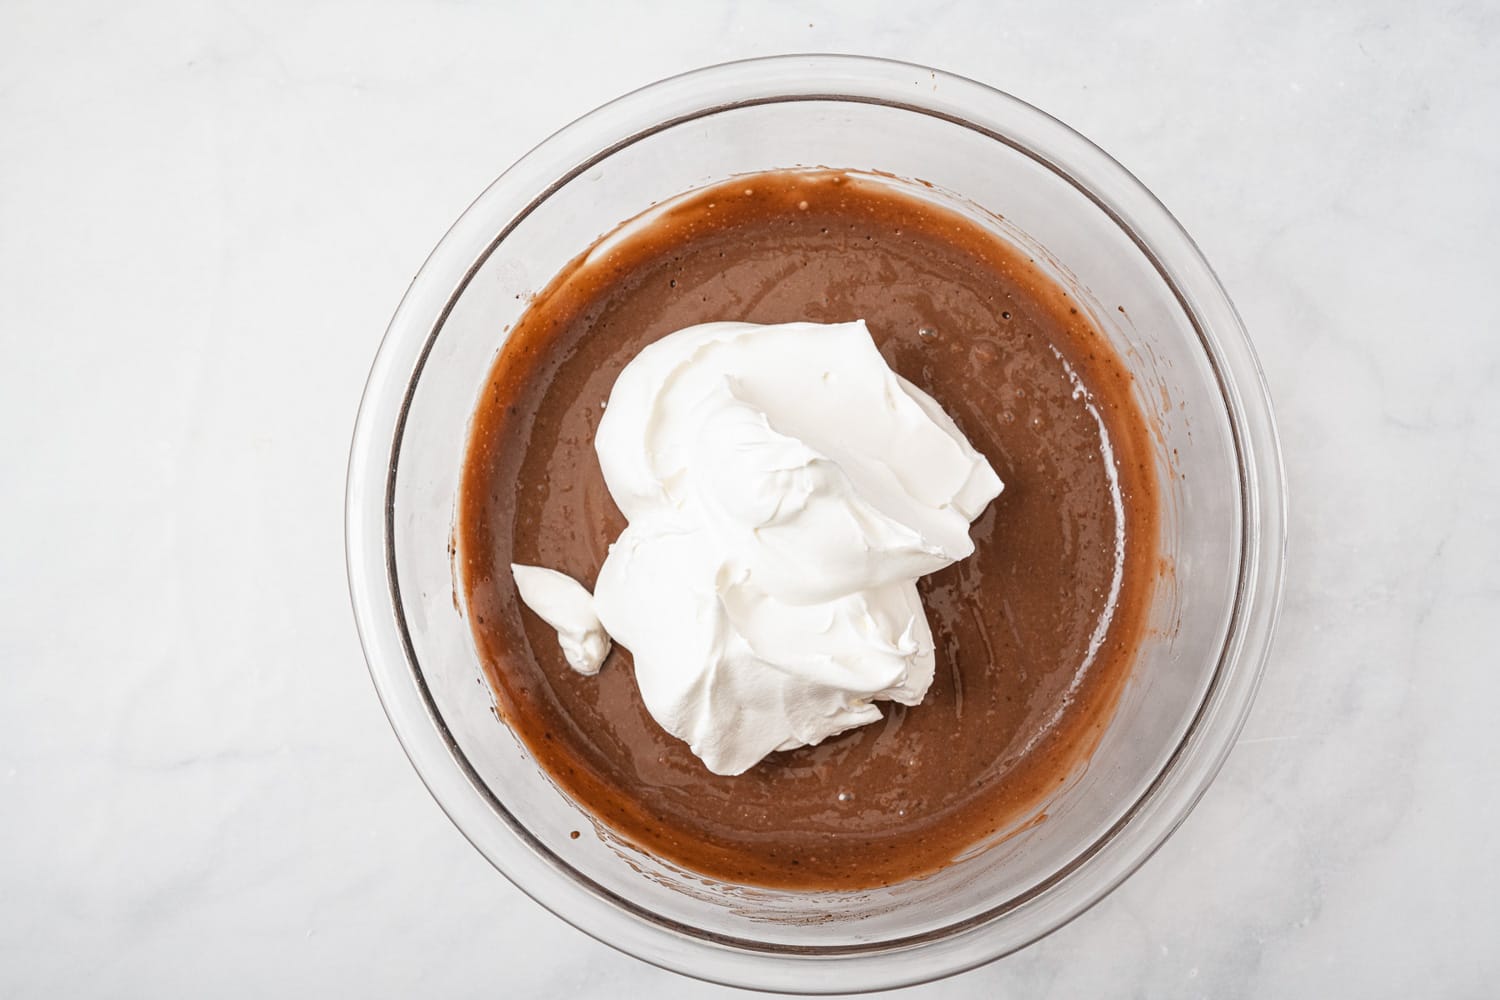 Whipped topping added to a bowl of chocolate pudding